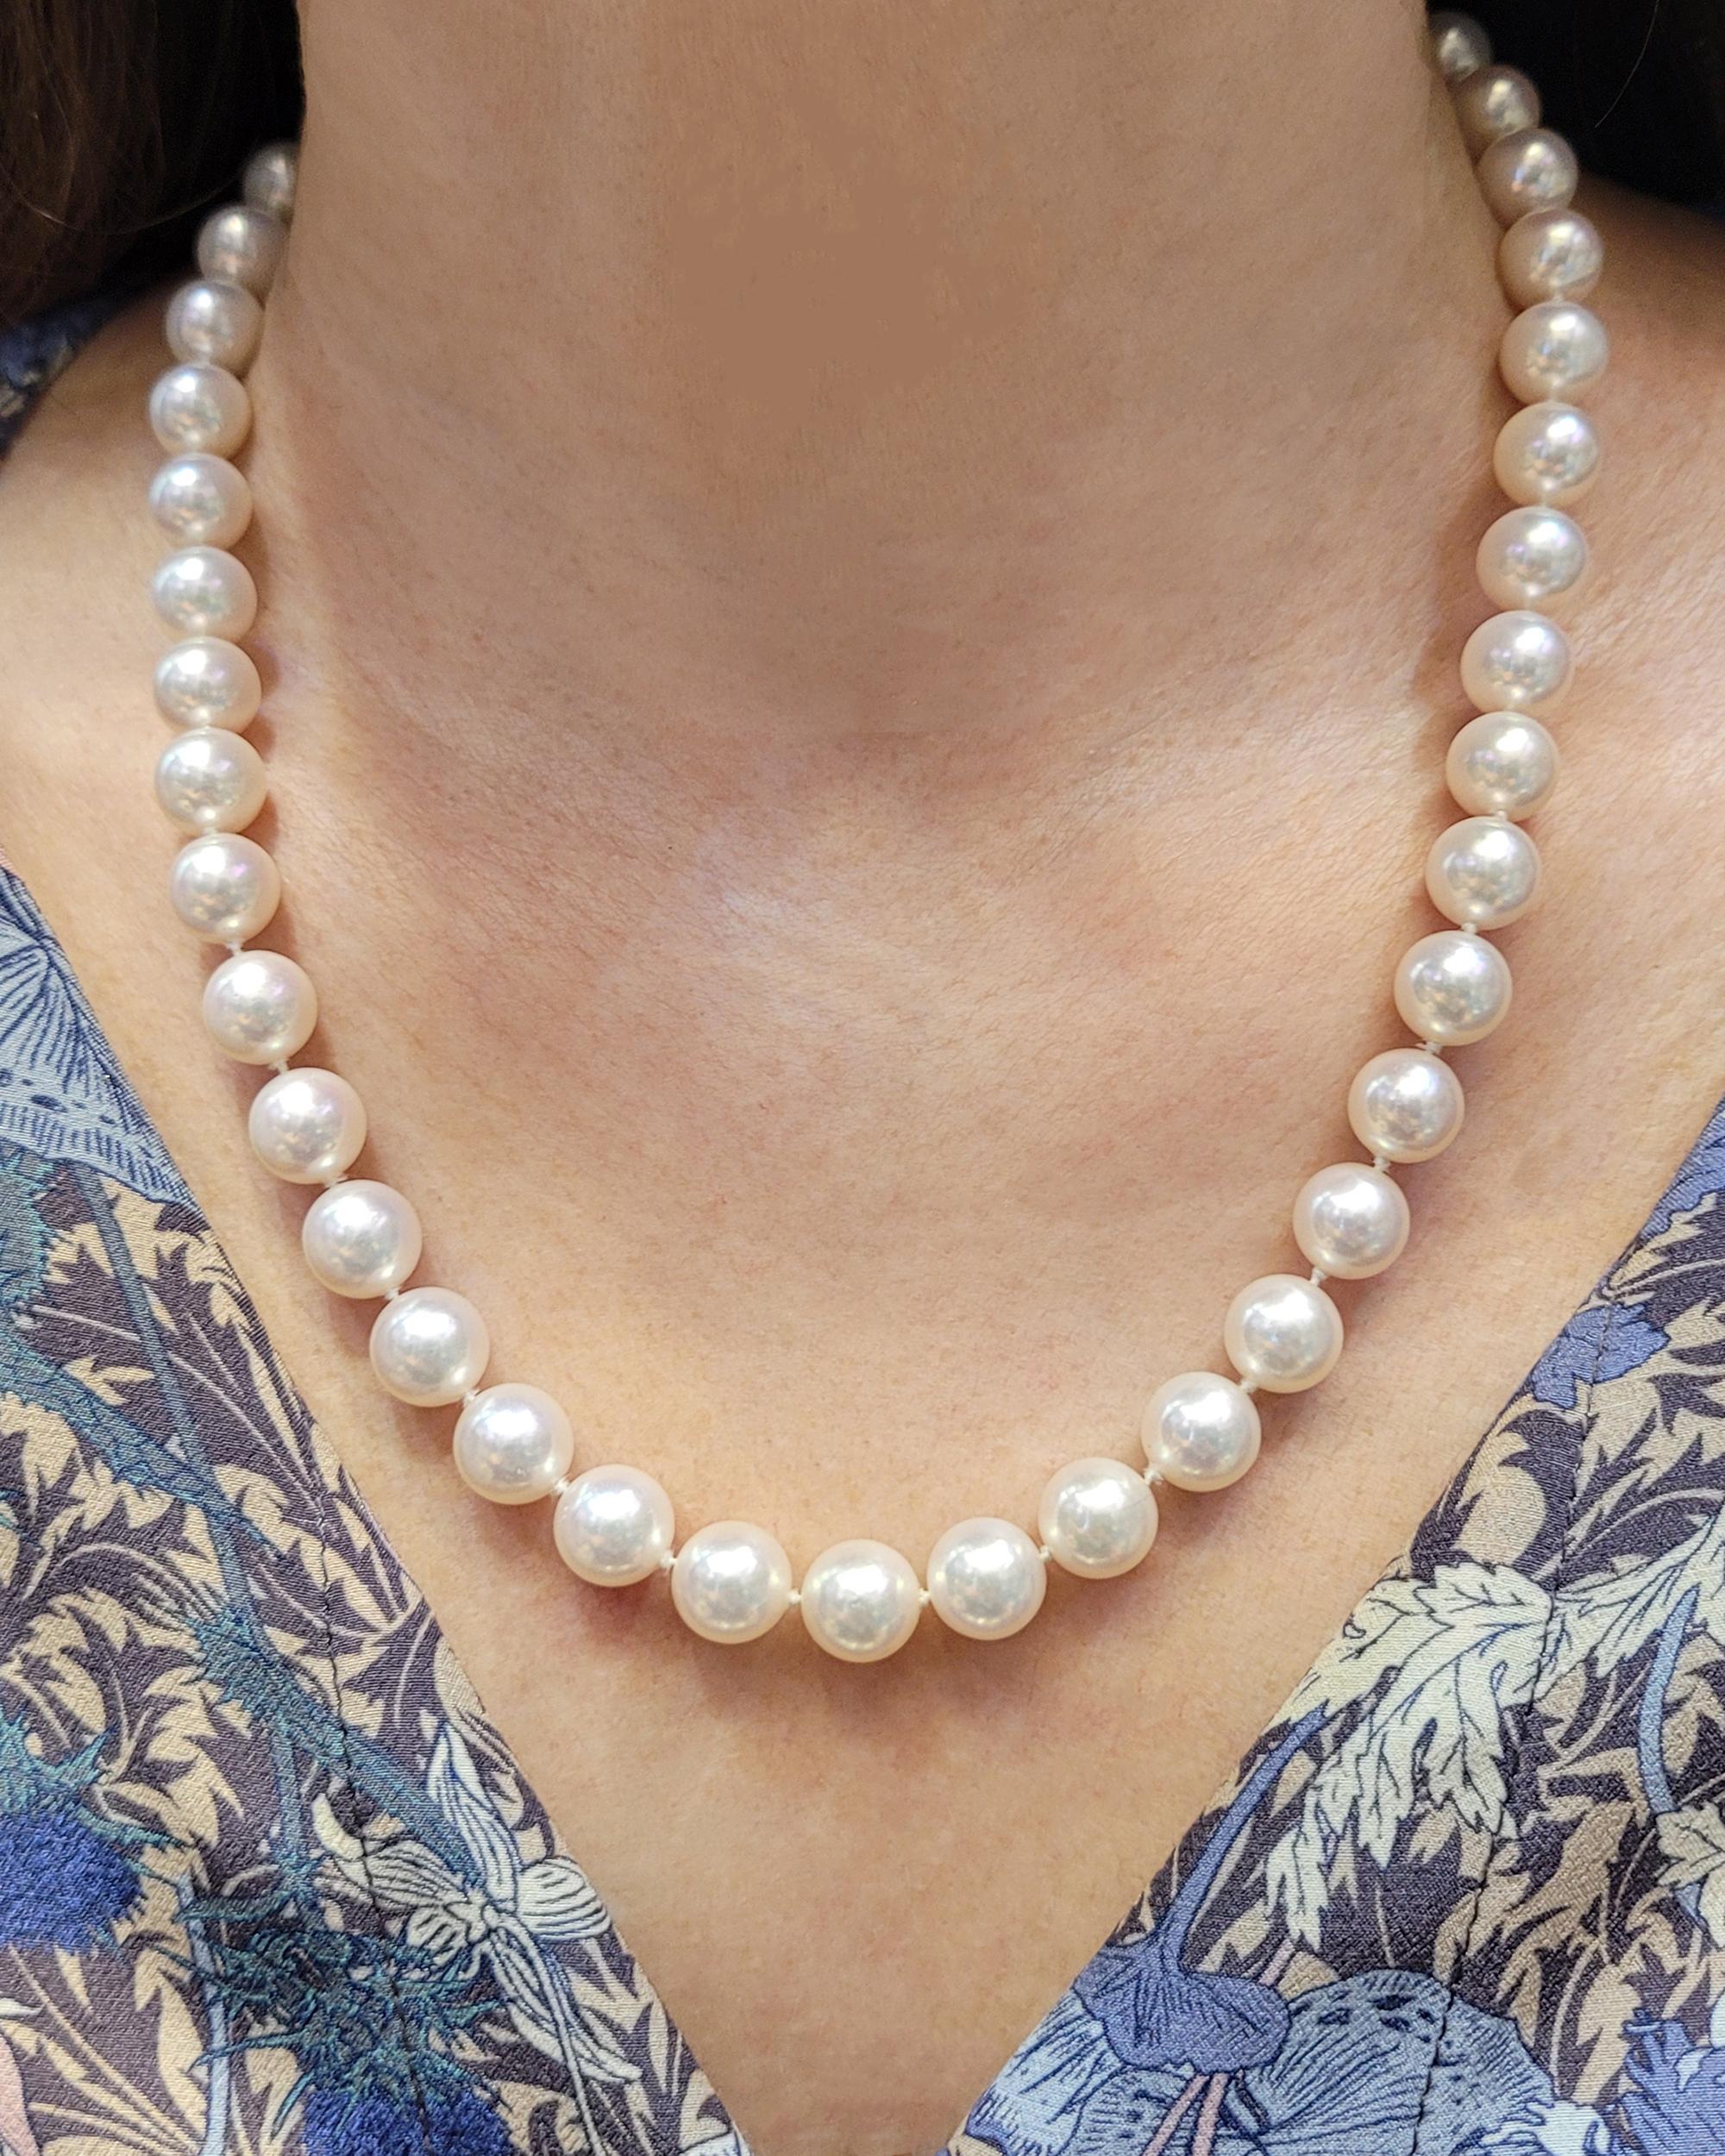 South Sea Pearl Bead Necklace In Excellent Condition For Sale In New York, NY